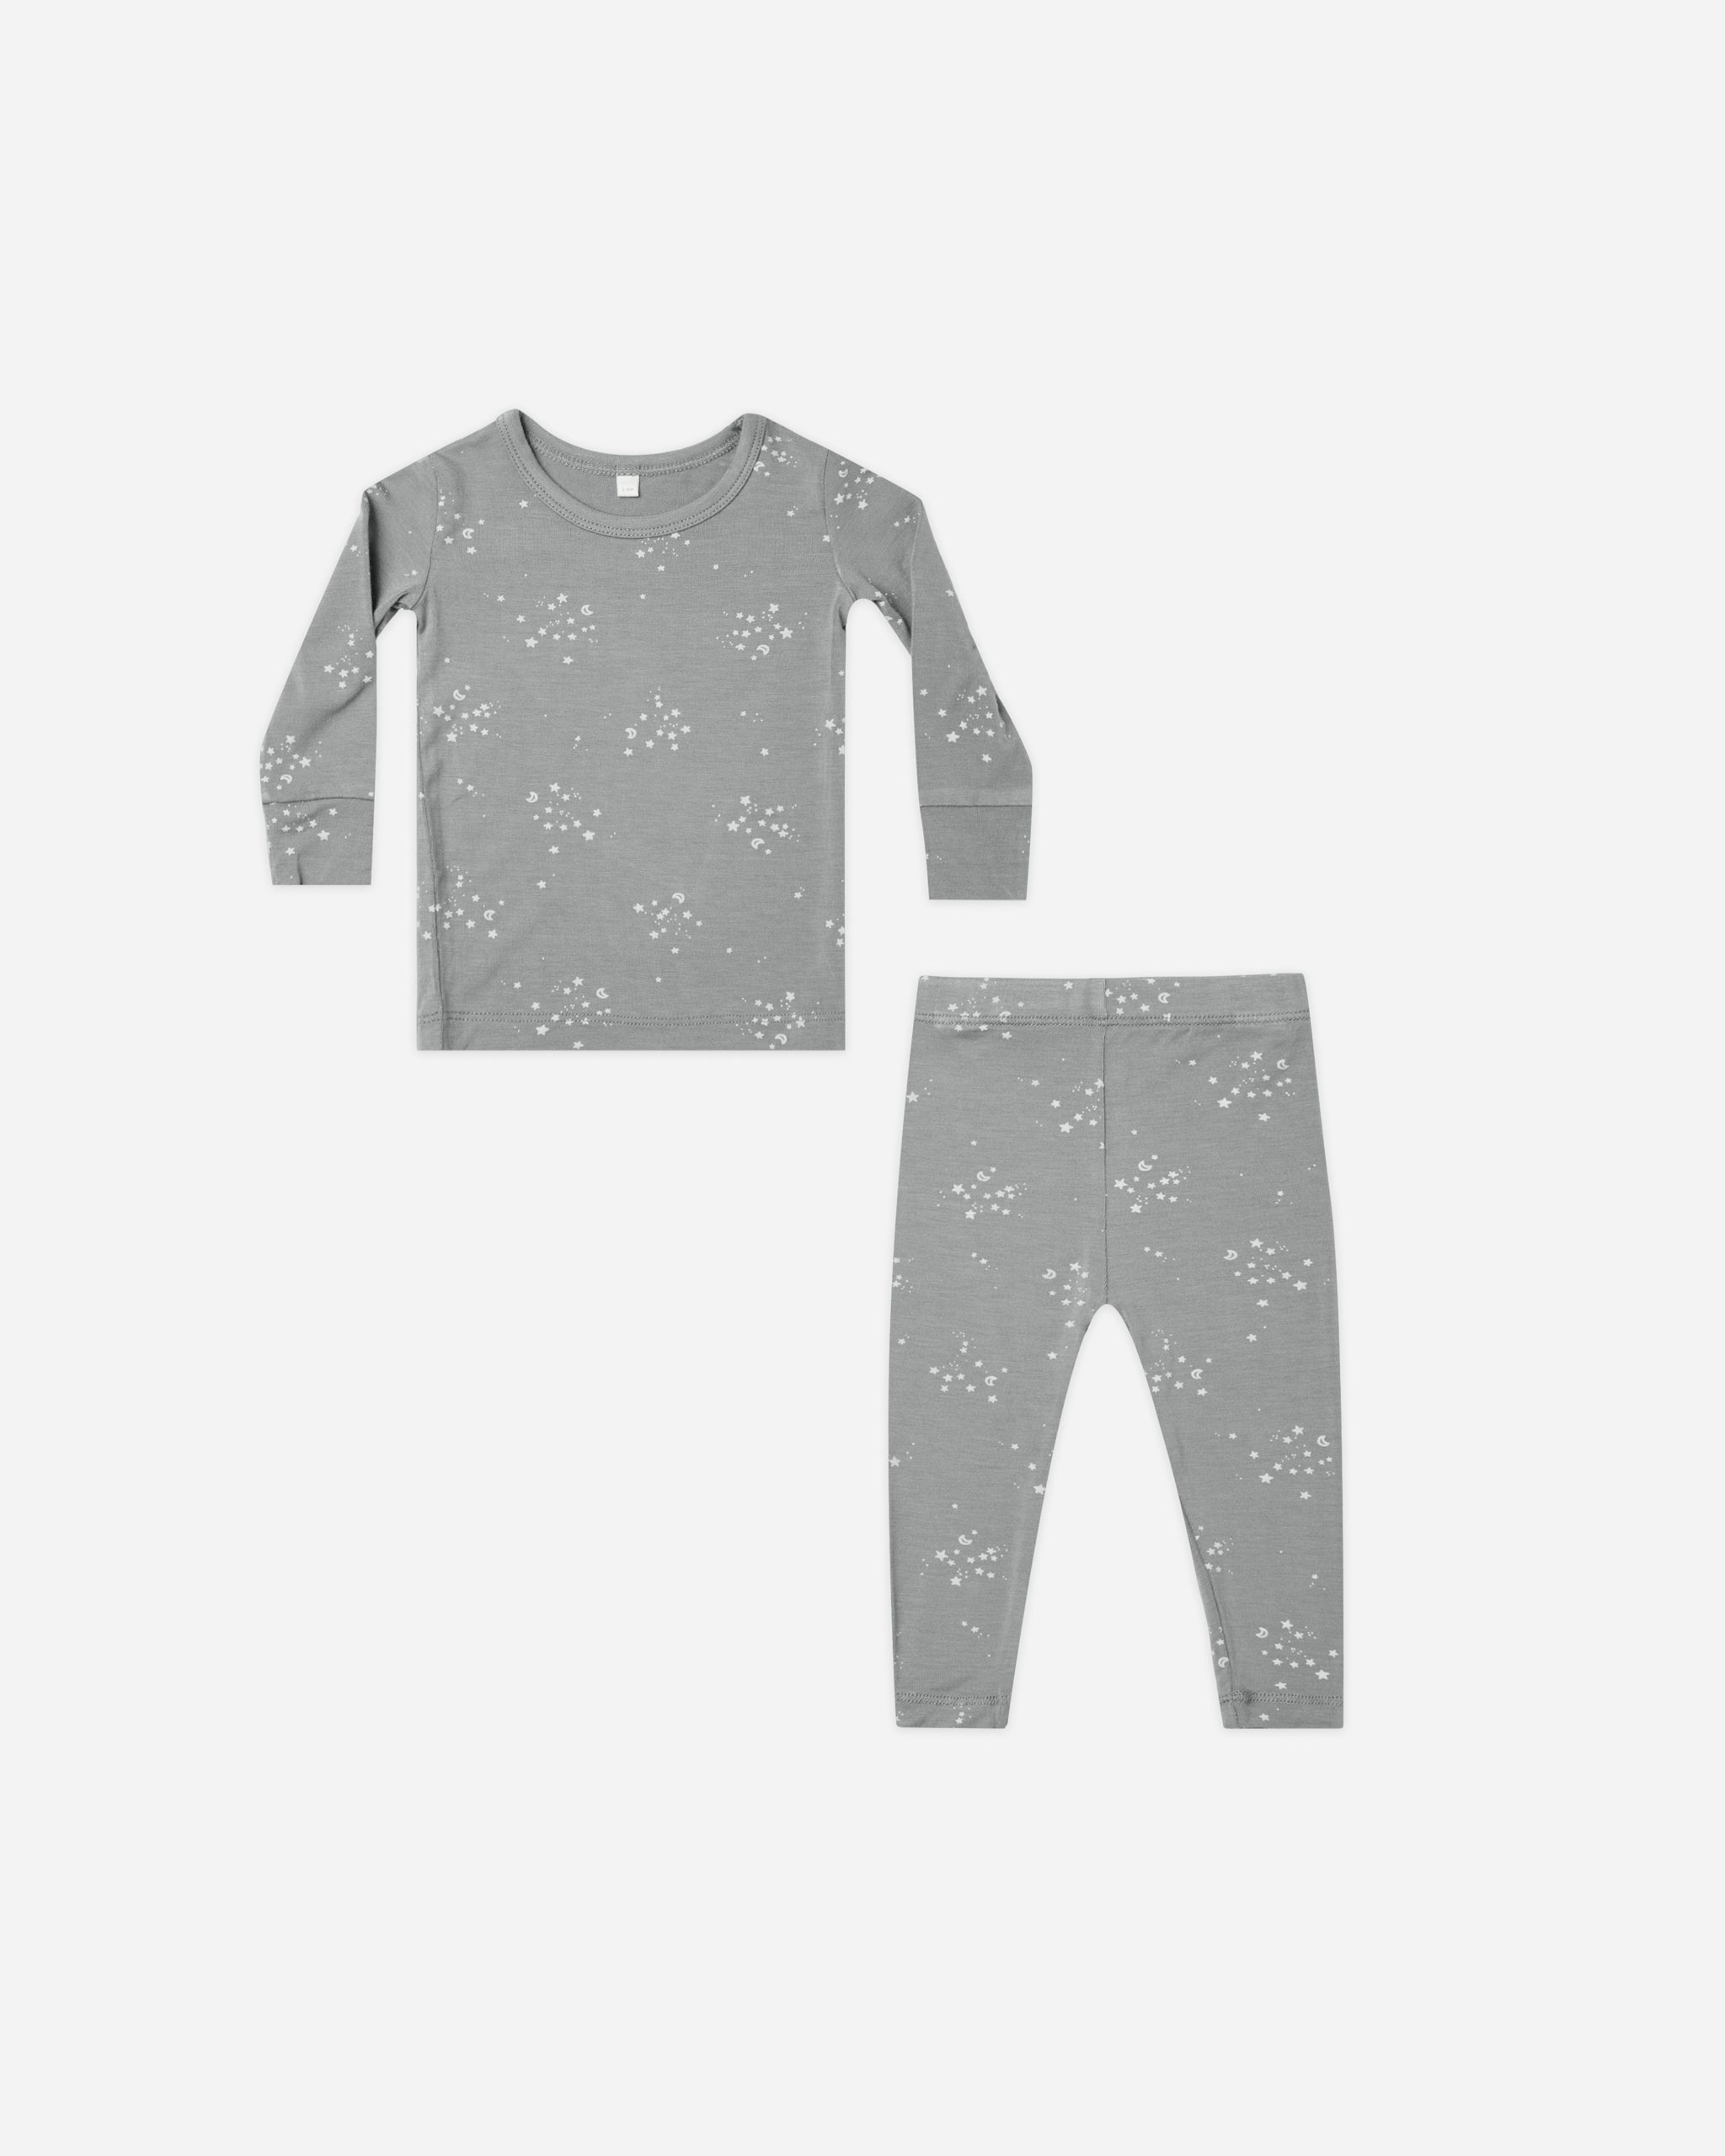 Bamboo Pajama Set || Twinkle - Rylee + Cru | Kids Clothes | Trendy Baby Clothes | Modern Infant Outfits |